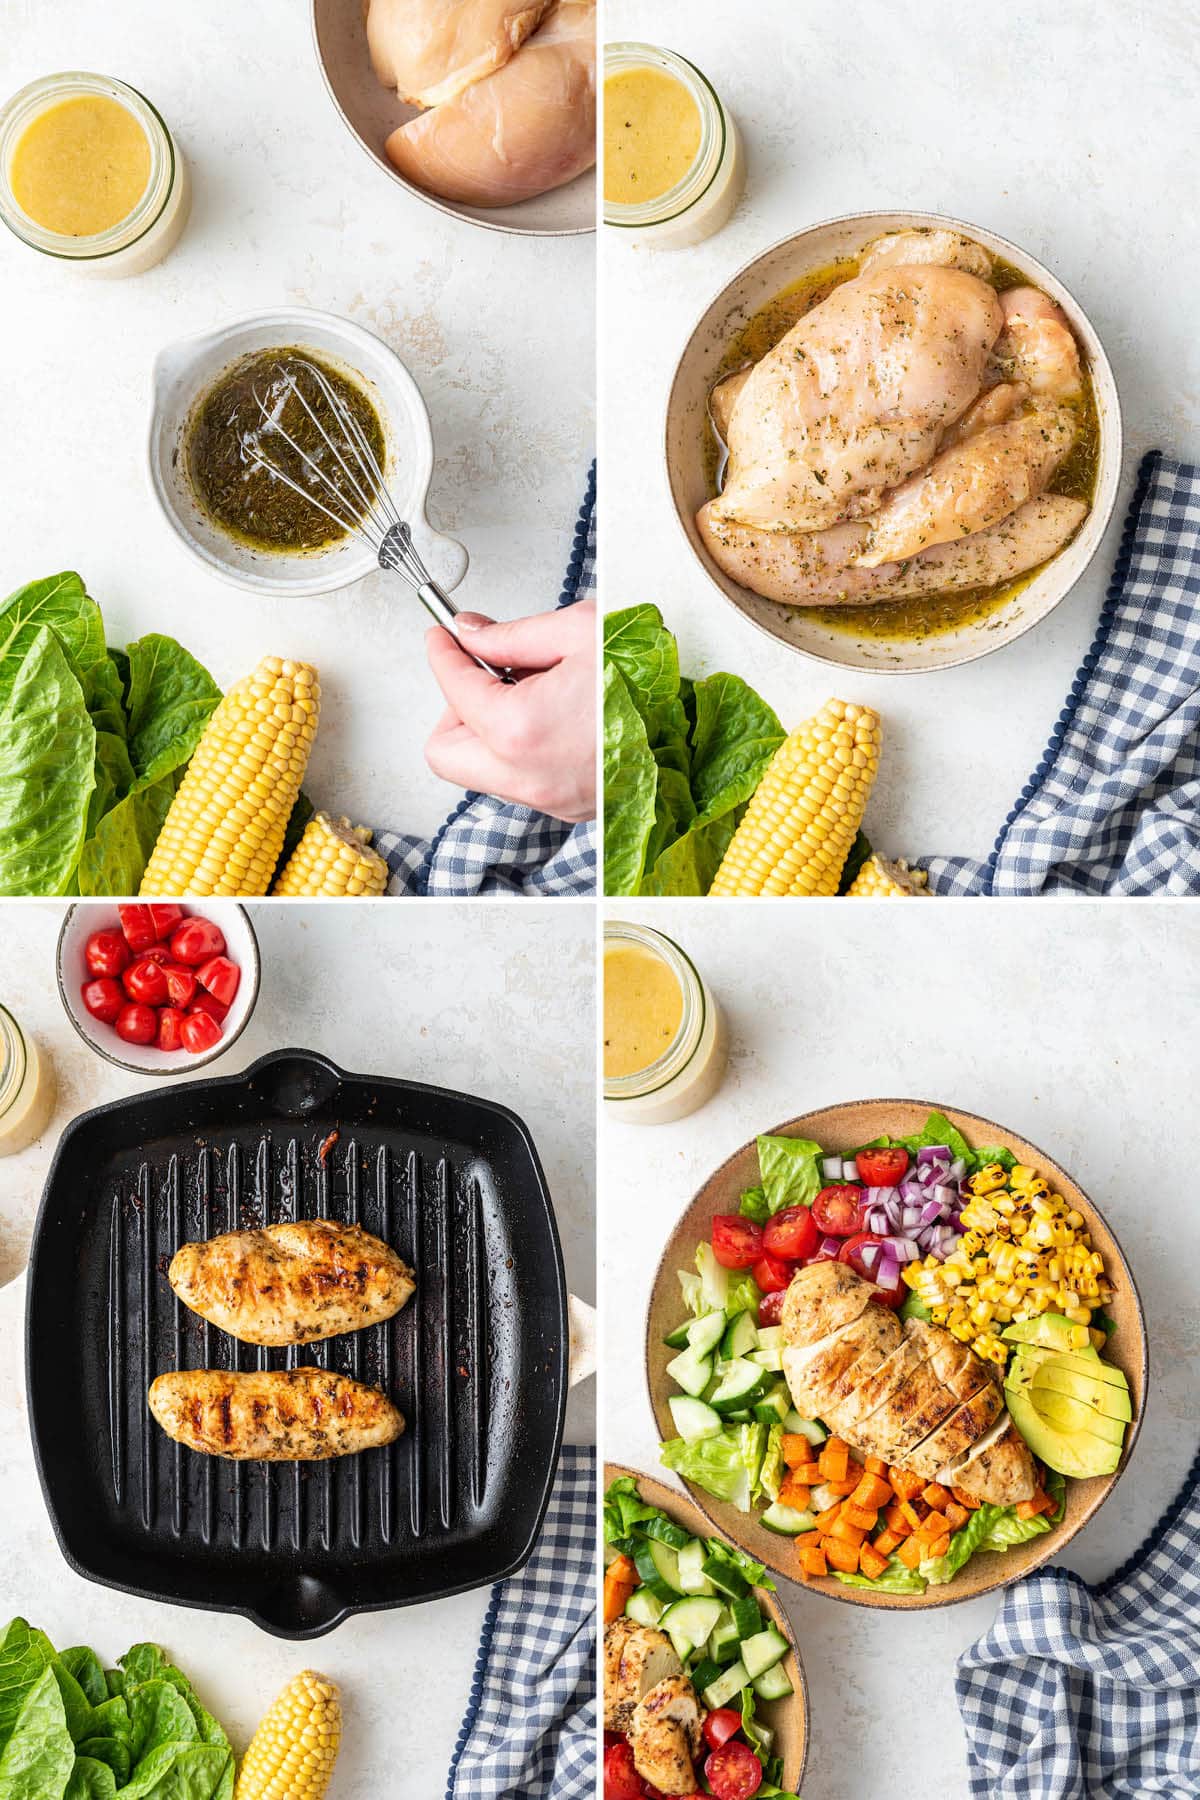 Four process photos showing how to make Grilled Chicken Salad: marinating the chicken, grilling the chicken and then assembling the salad.